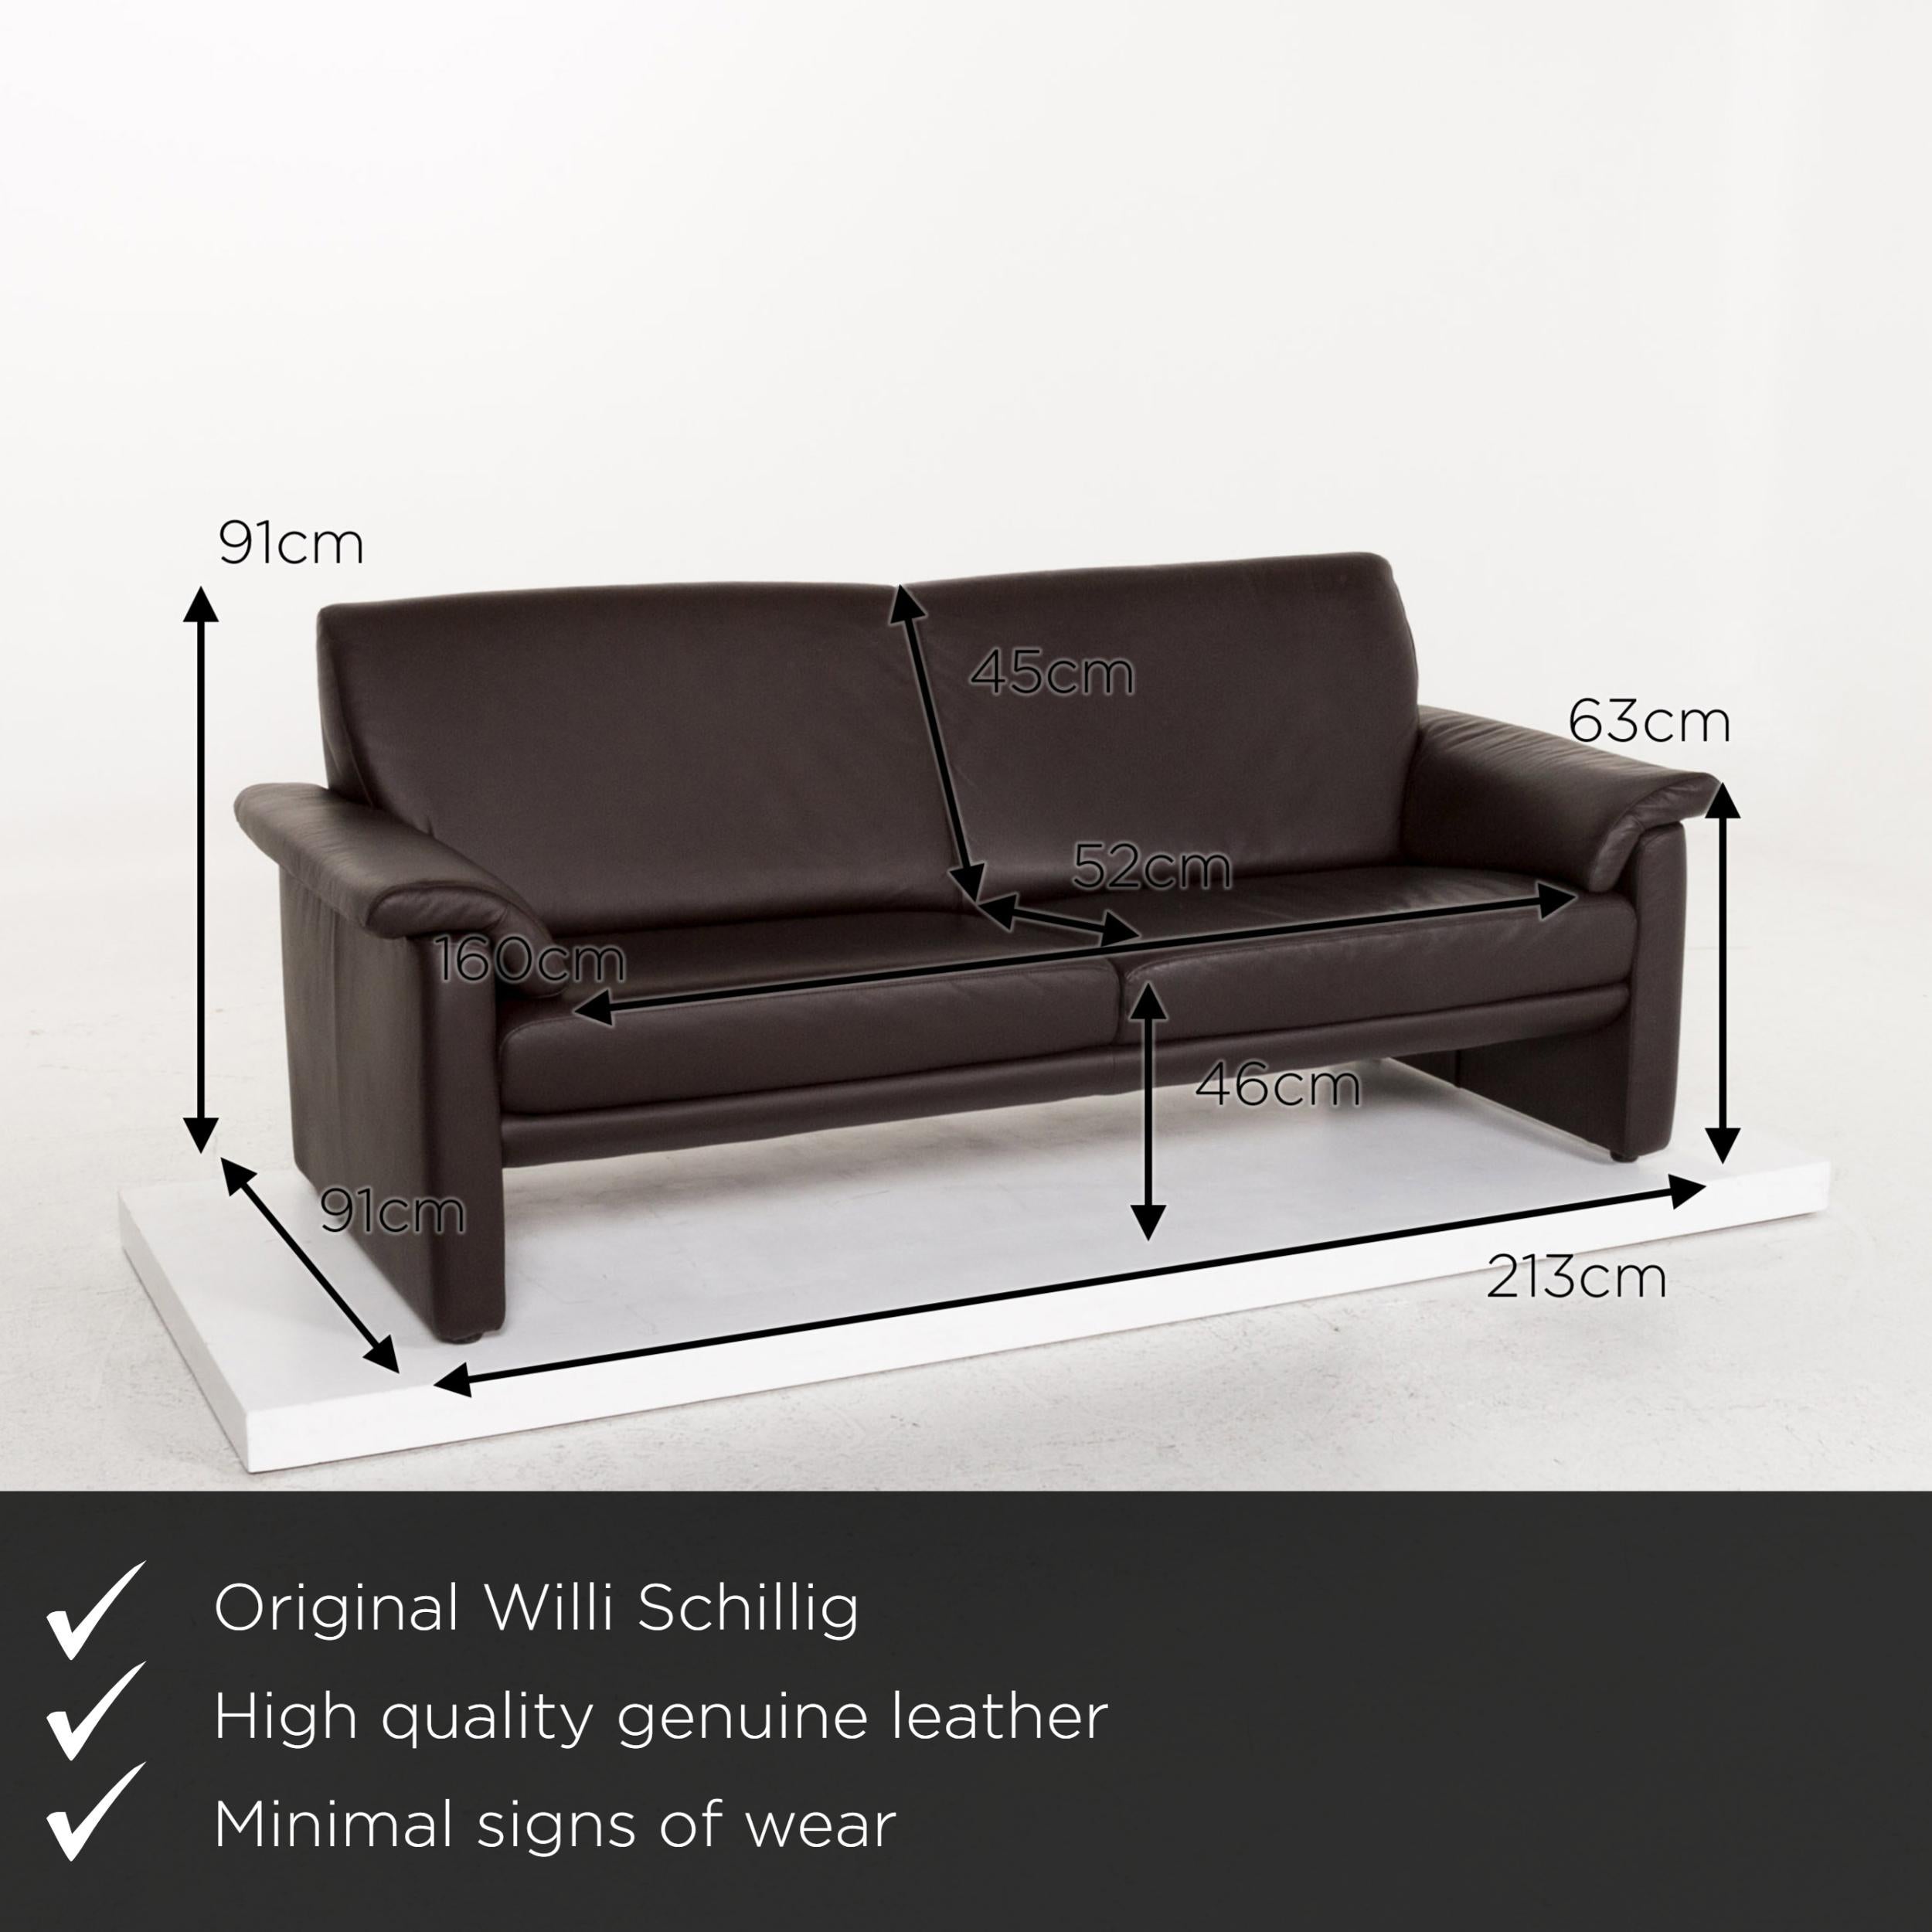 We present to you a Willi Schillig leather sofa set brown dark brown couch #.
   
 

 Product measurements in centimeters:
 

Depth 91
Width 213
Height 91
Seat height 46
Rest height 63
Seat depth 52
Seat width 160
Back height 45.